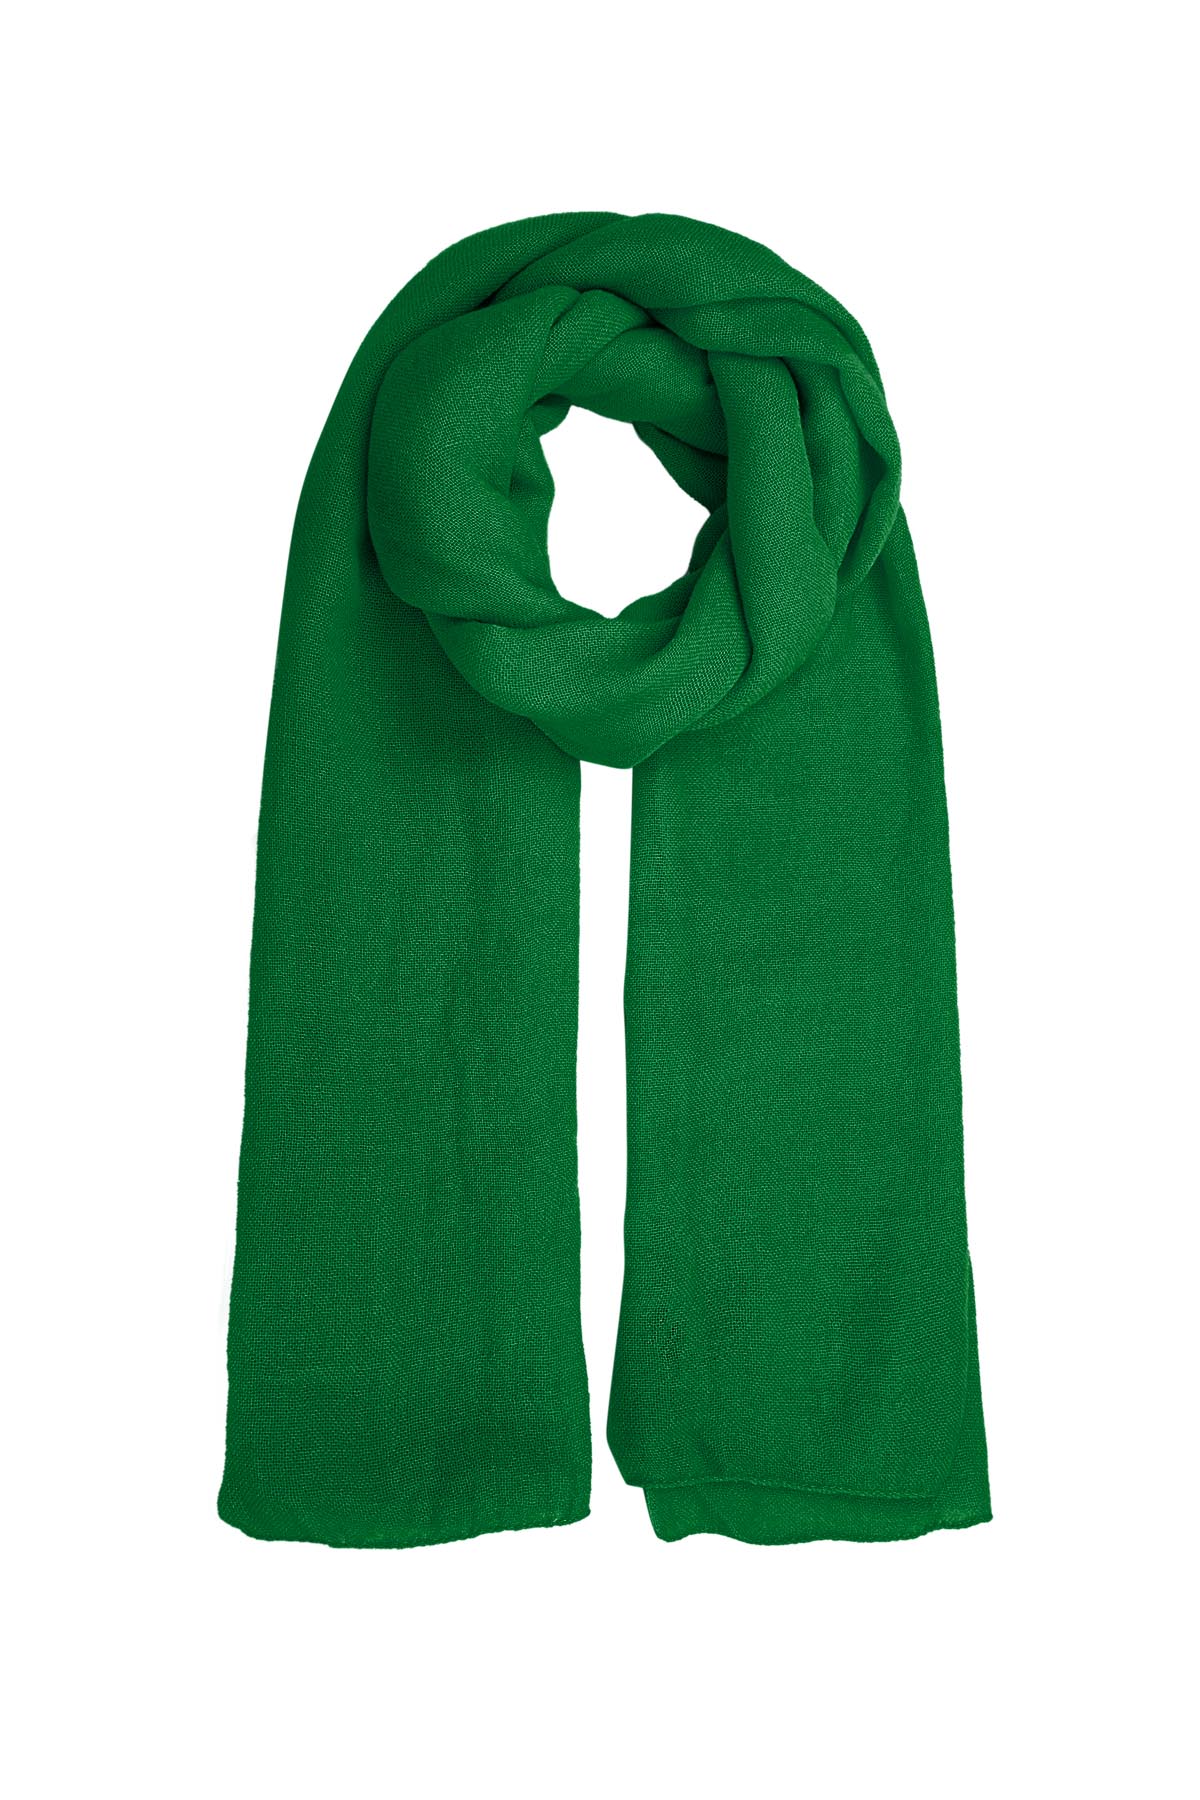 Scarf solid color - peacock green h5 